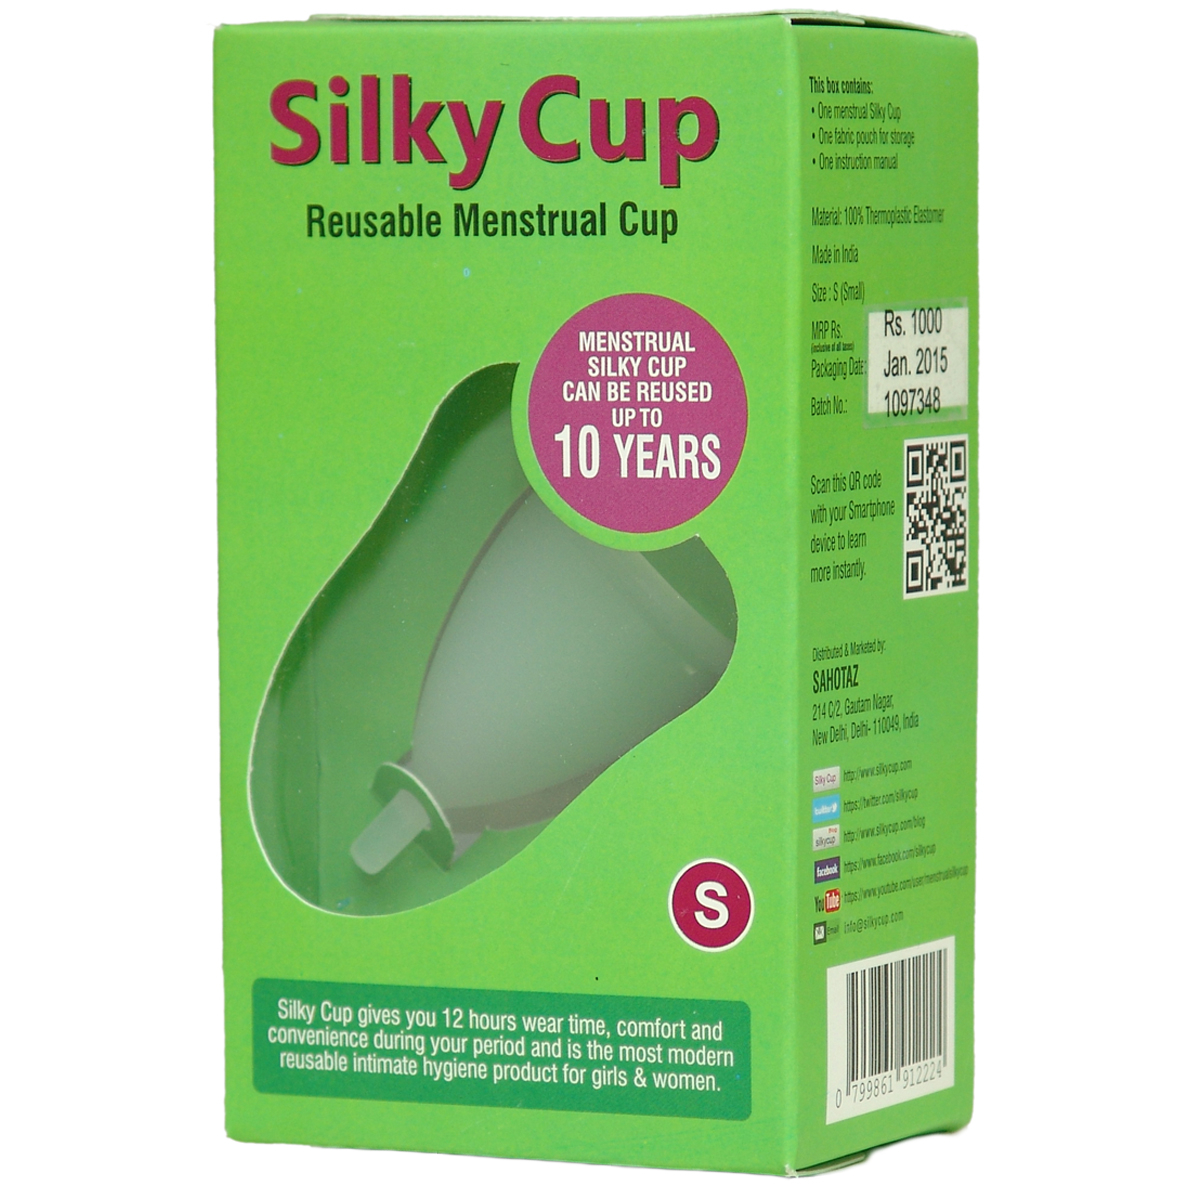 Silky Cup Reusable Menstrual Cup is alternative to tampons 